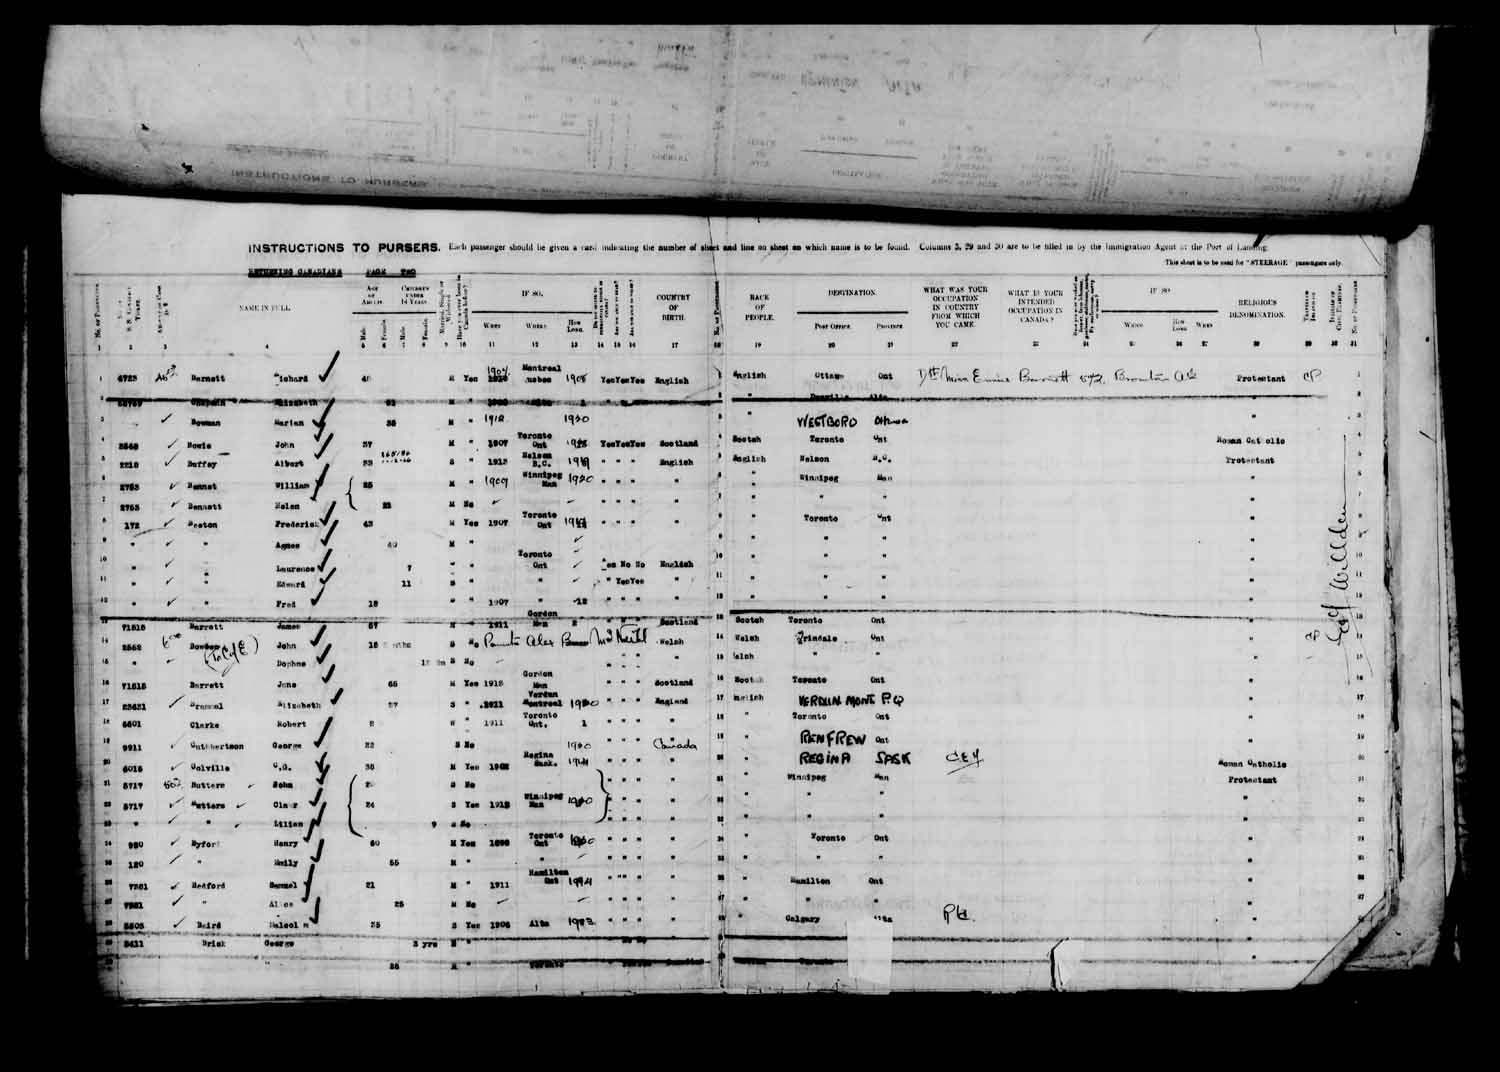 Digitized page of Passenger Lists for Image No.: e003610629